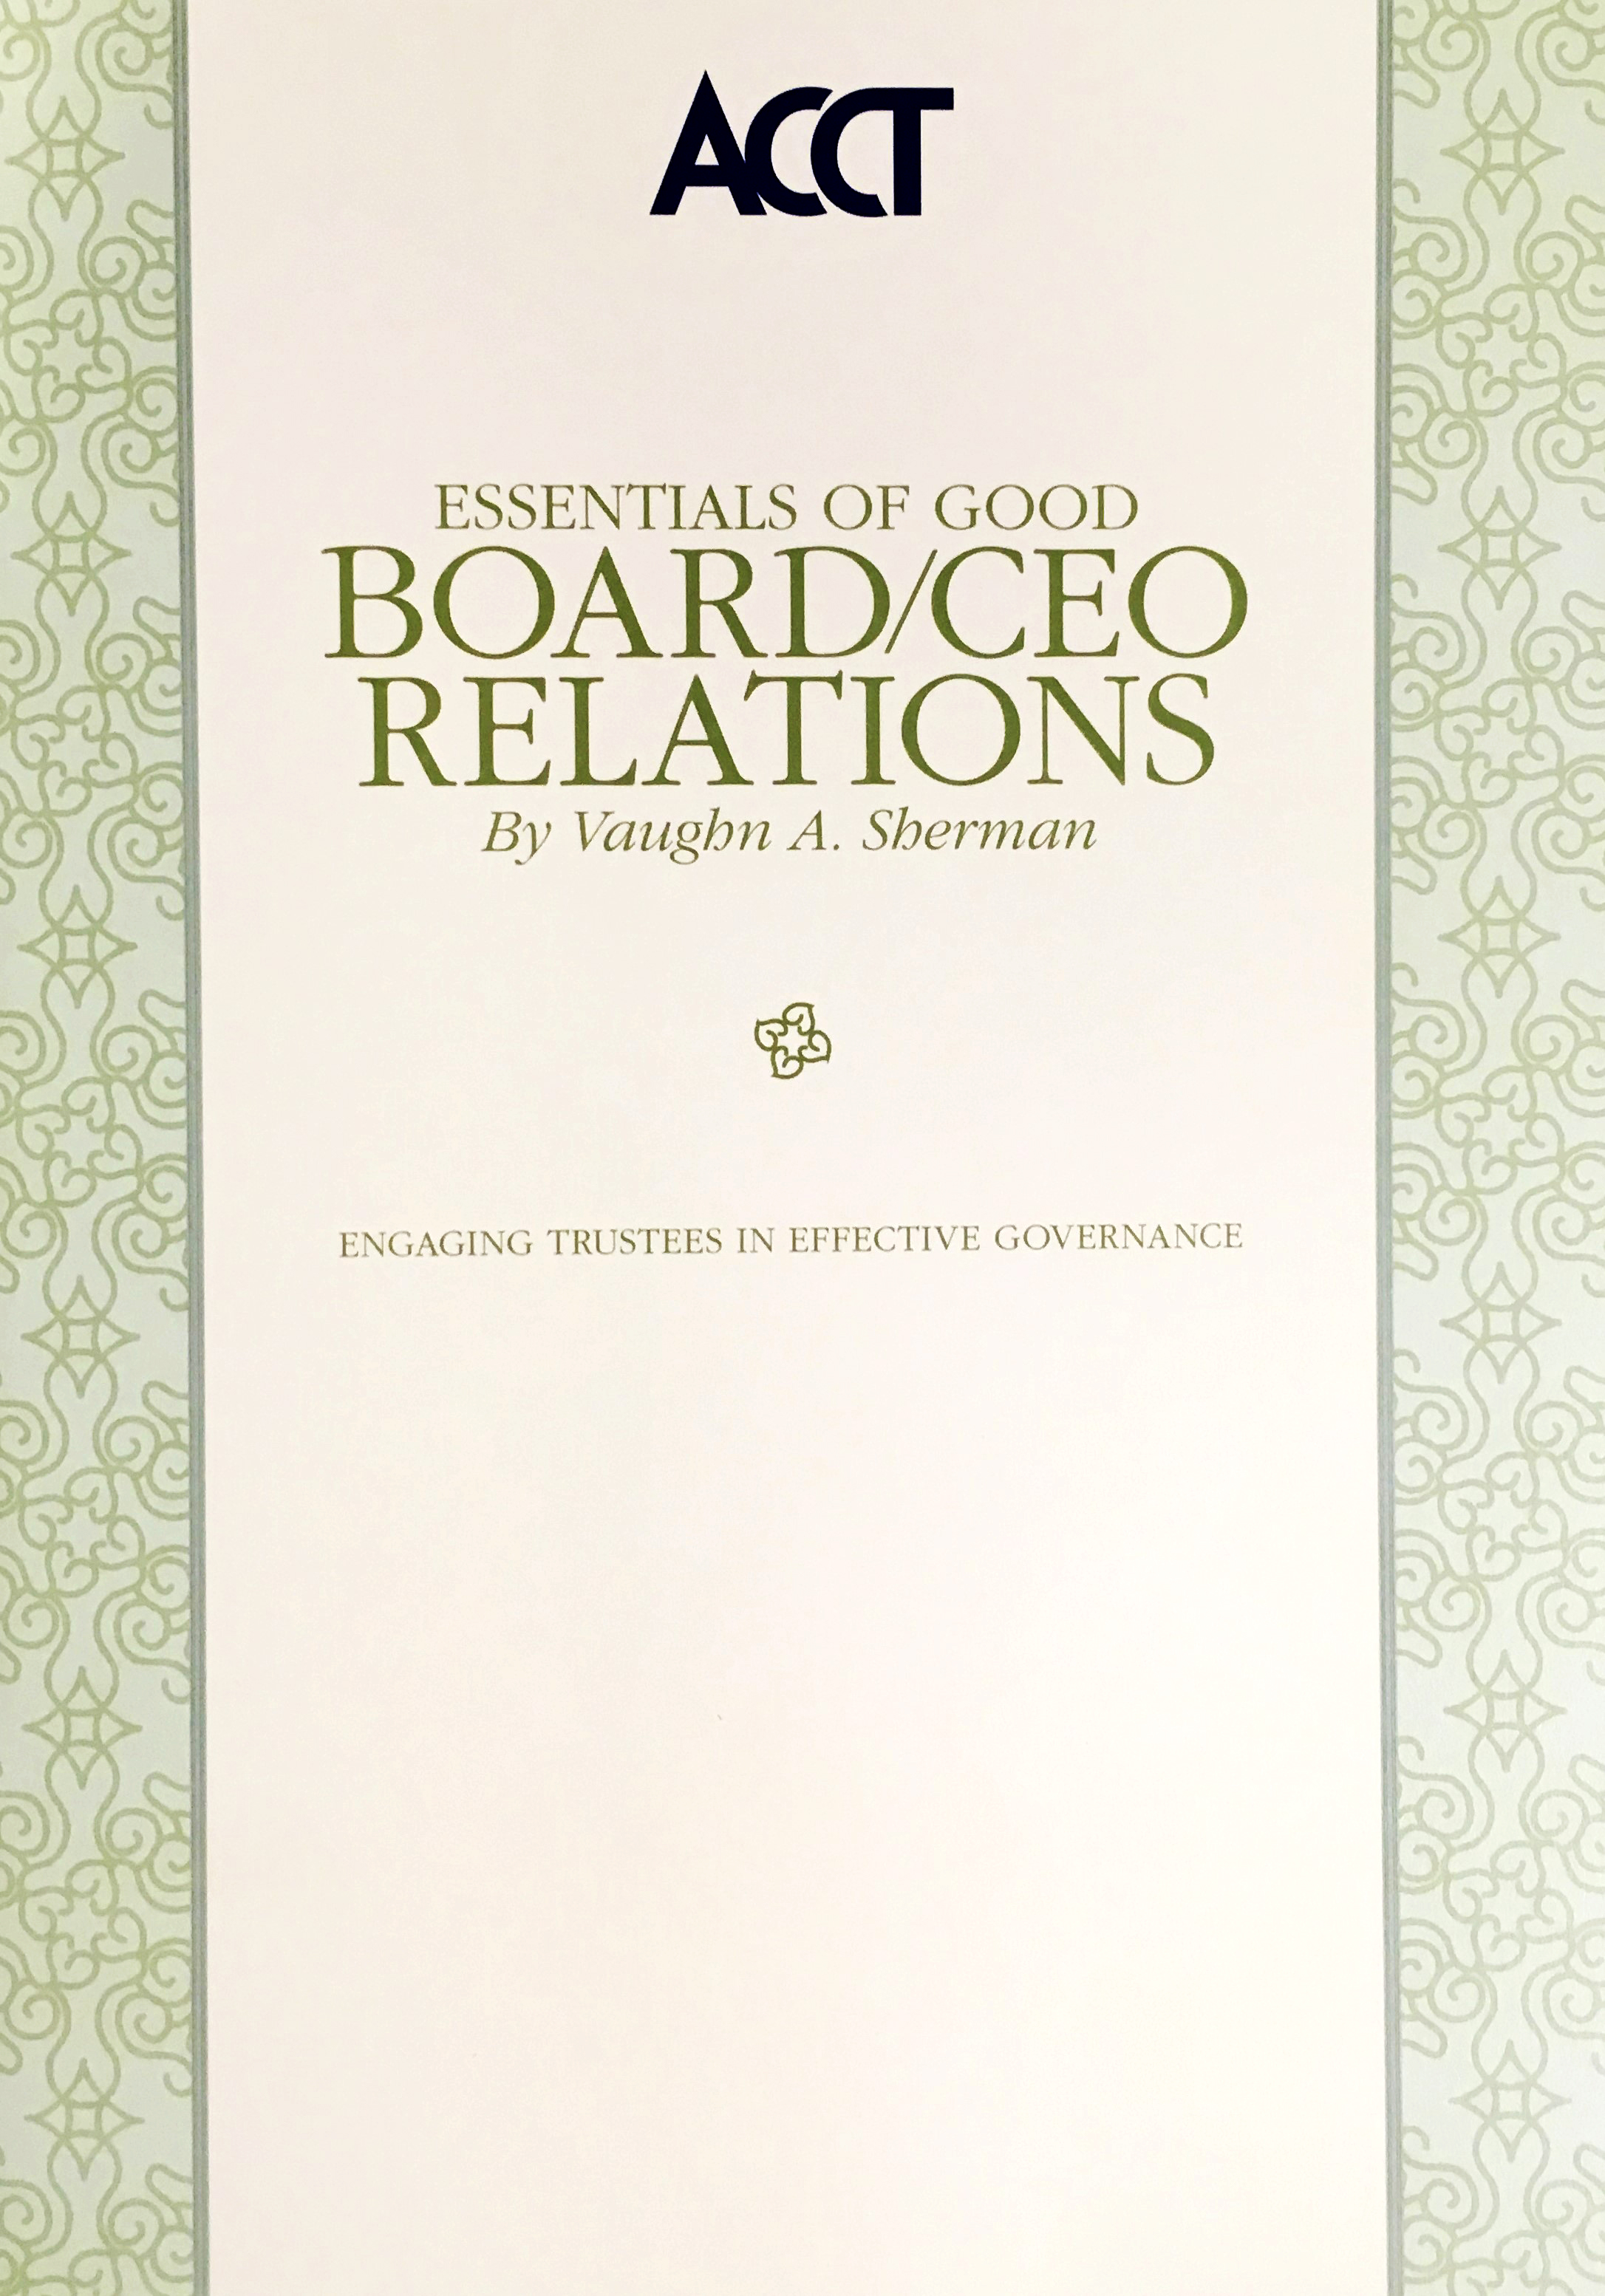 Essentials of Good Board/CEO Relations